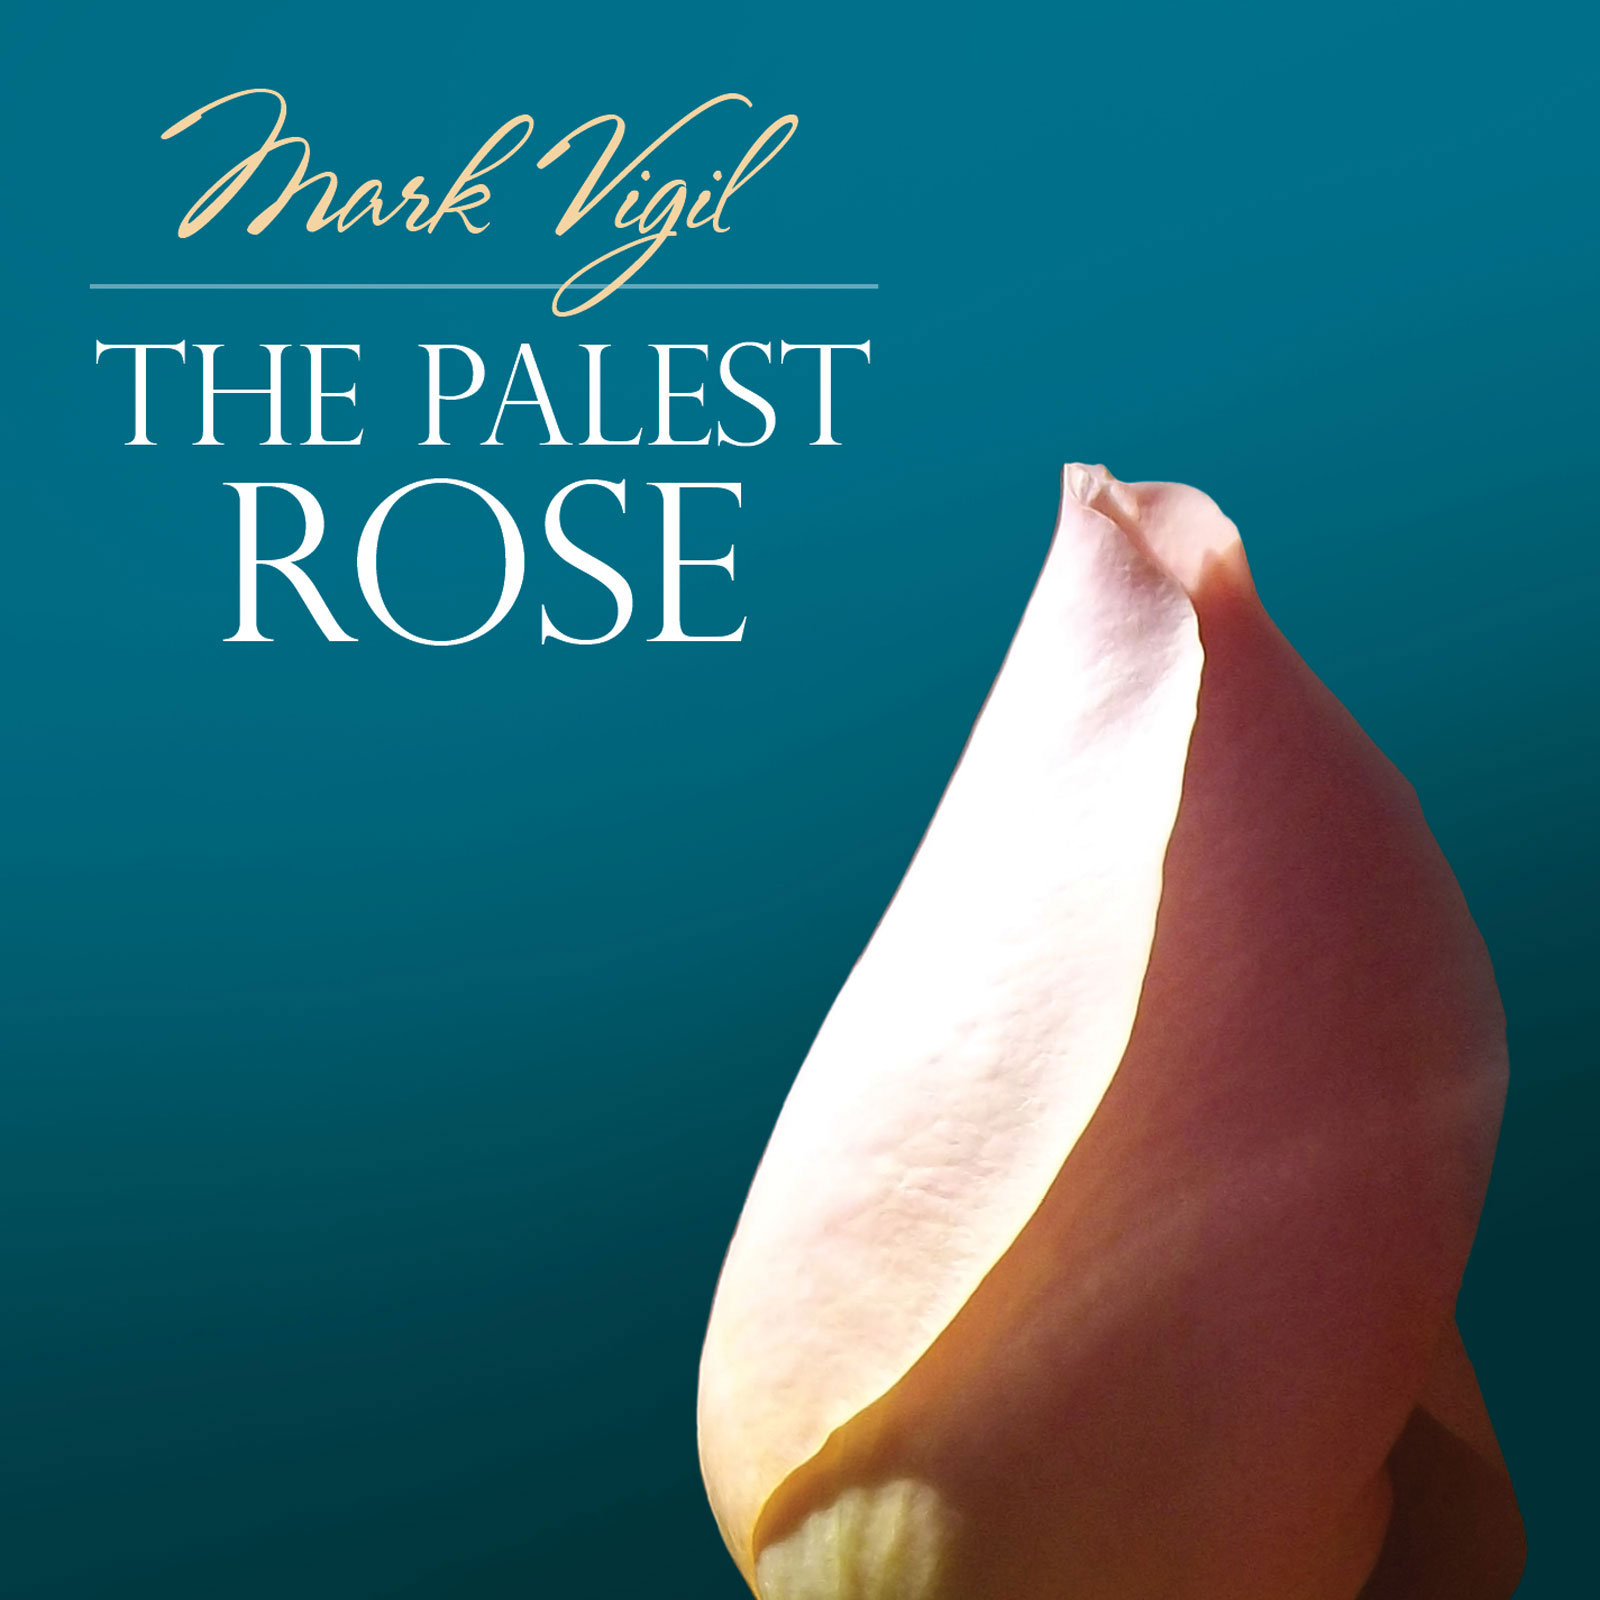 The Palest Rose